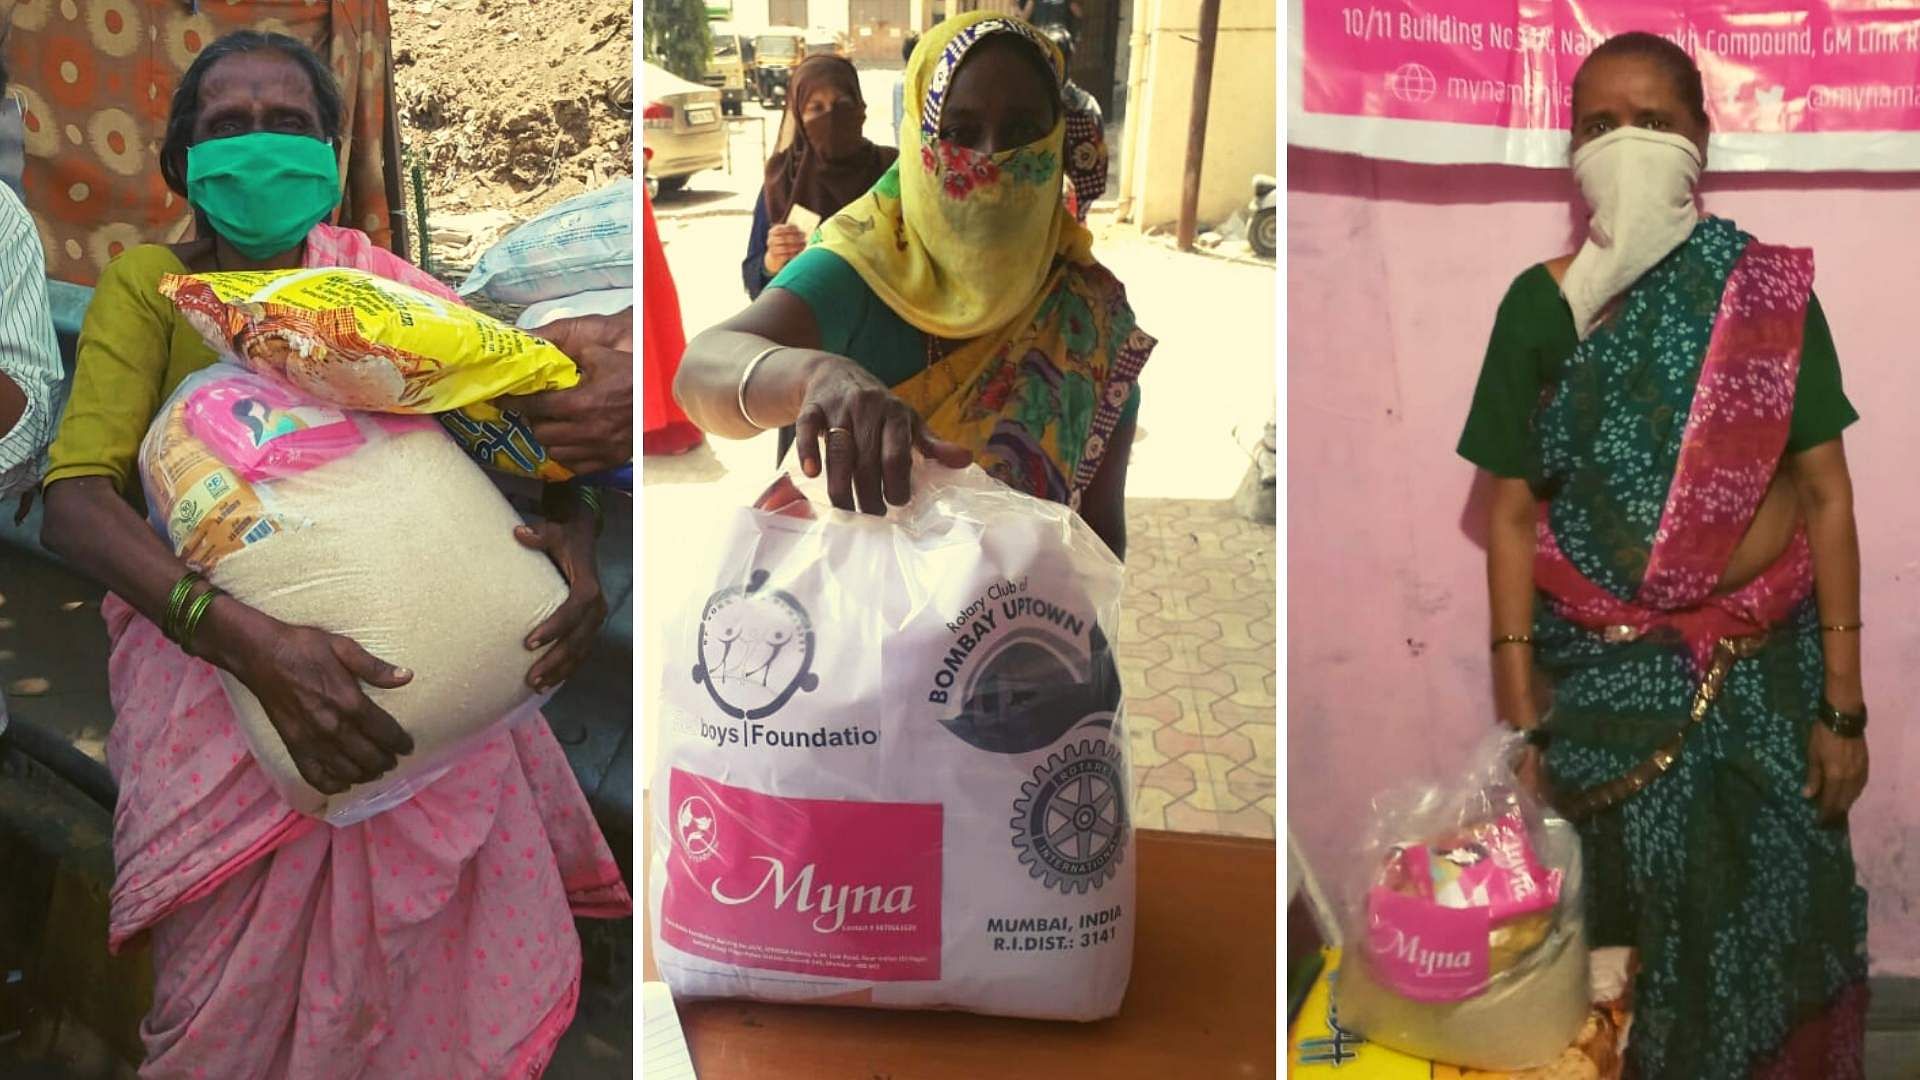 Women residing in the slums of Govandi collect their relief package.